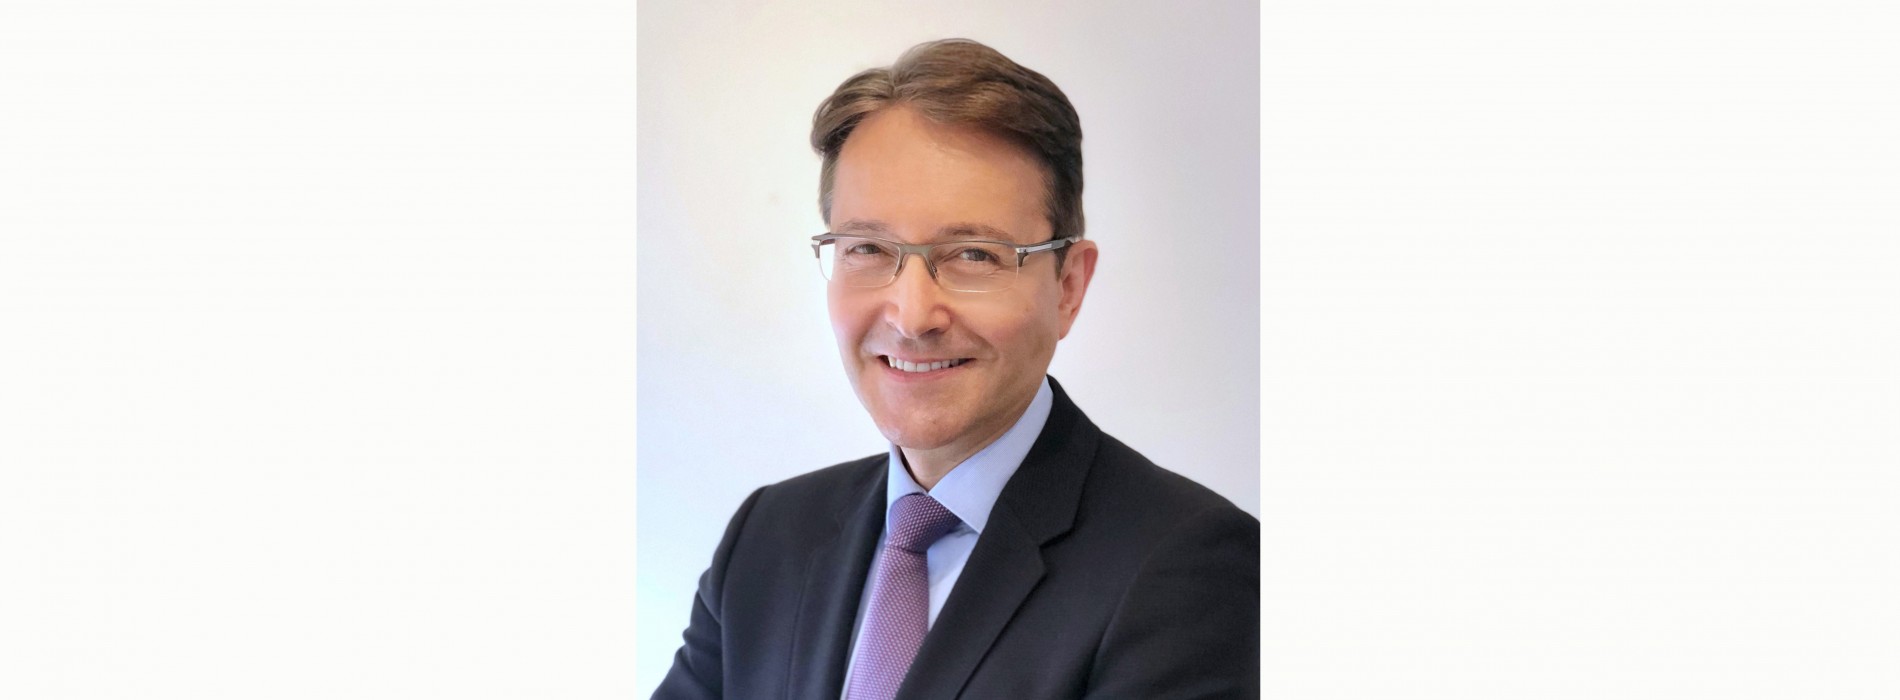 Jean-François Ferret appointed as the CEO of Small Luxury Hotels of the World